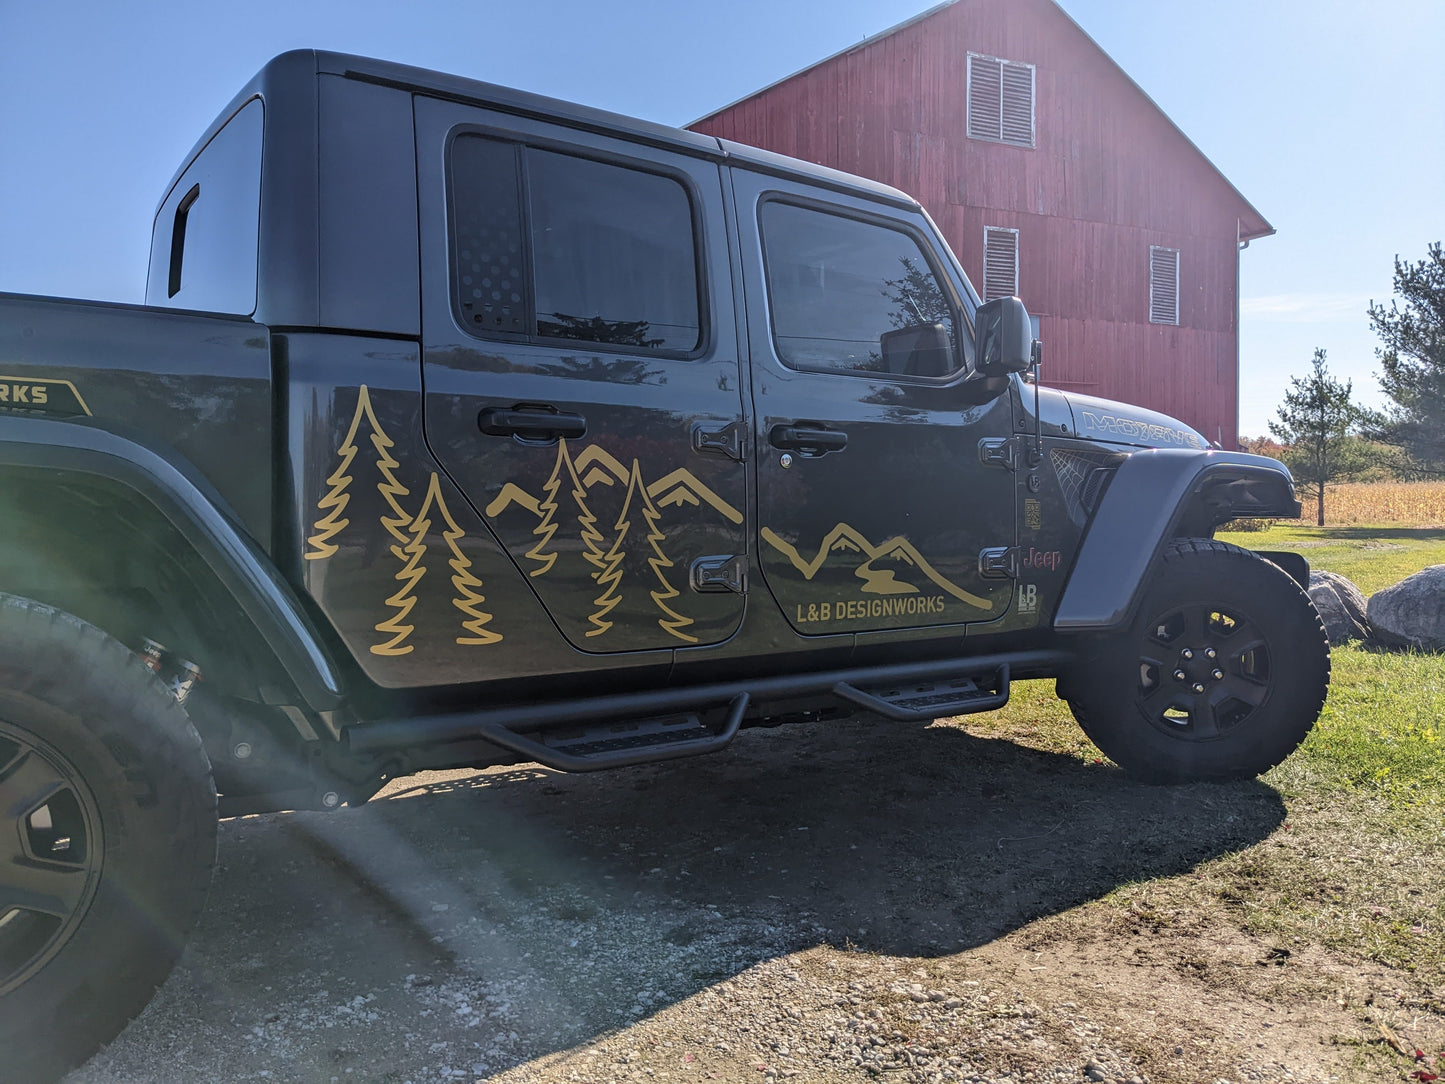 Jeep Side Mountain Forest Decal Set- Fits Jeep Wrangler & Gladiator JL Side Decal-Pair (6 Pieces)